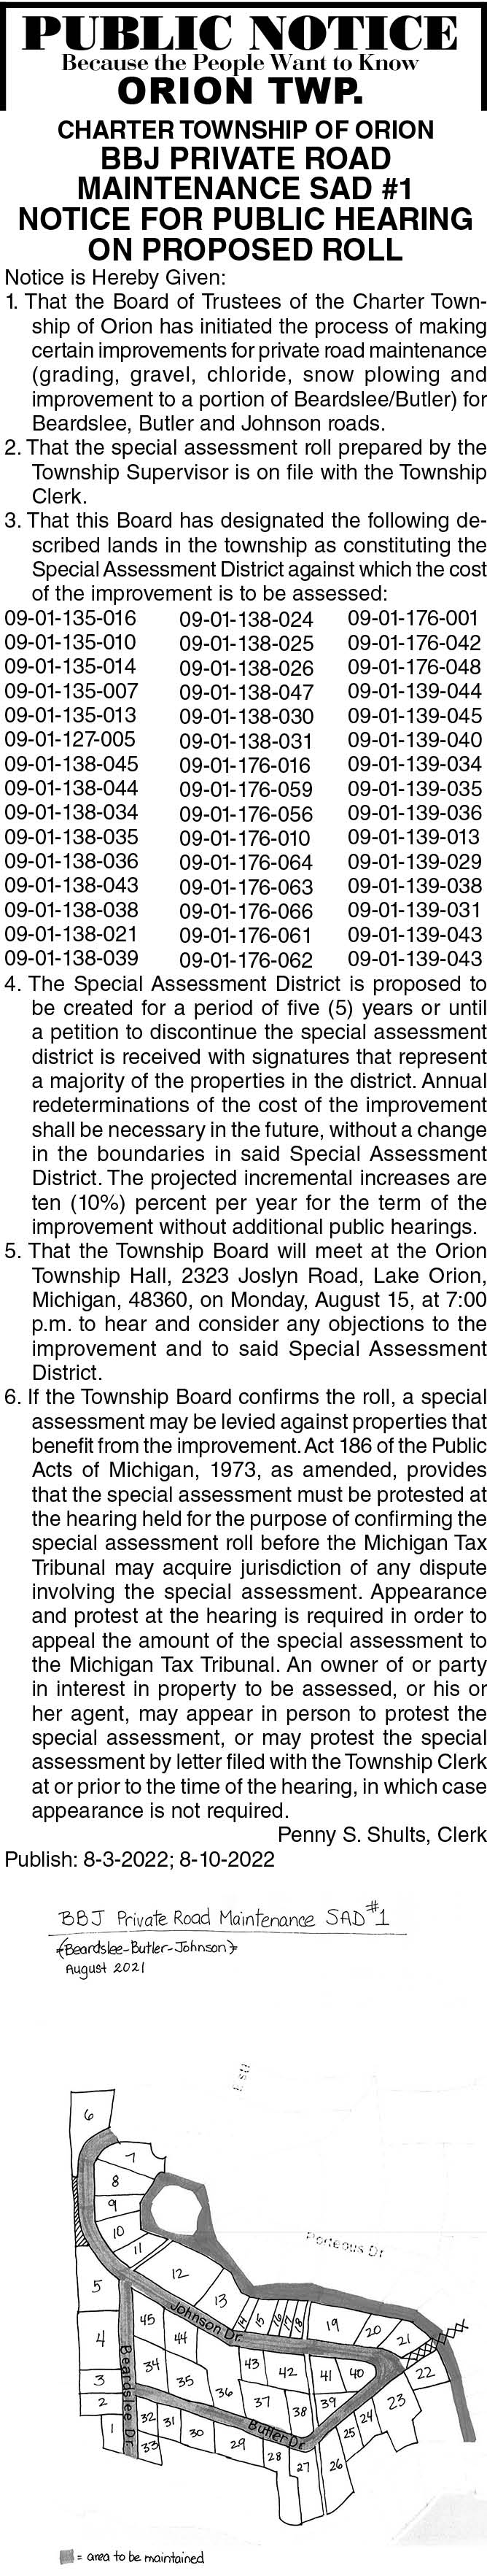 Orion Twp. BBJ Private Road Maintenance SAD #1 Notice for public hearing on proposed roll